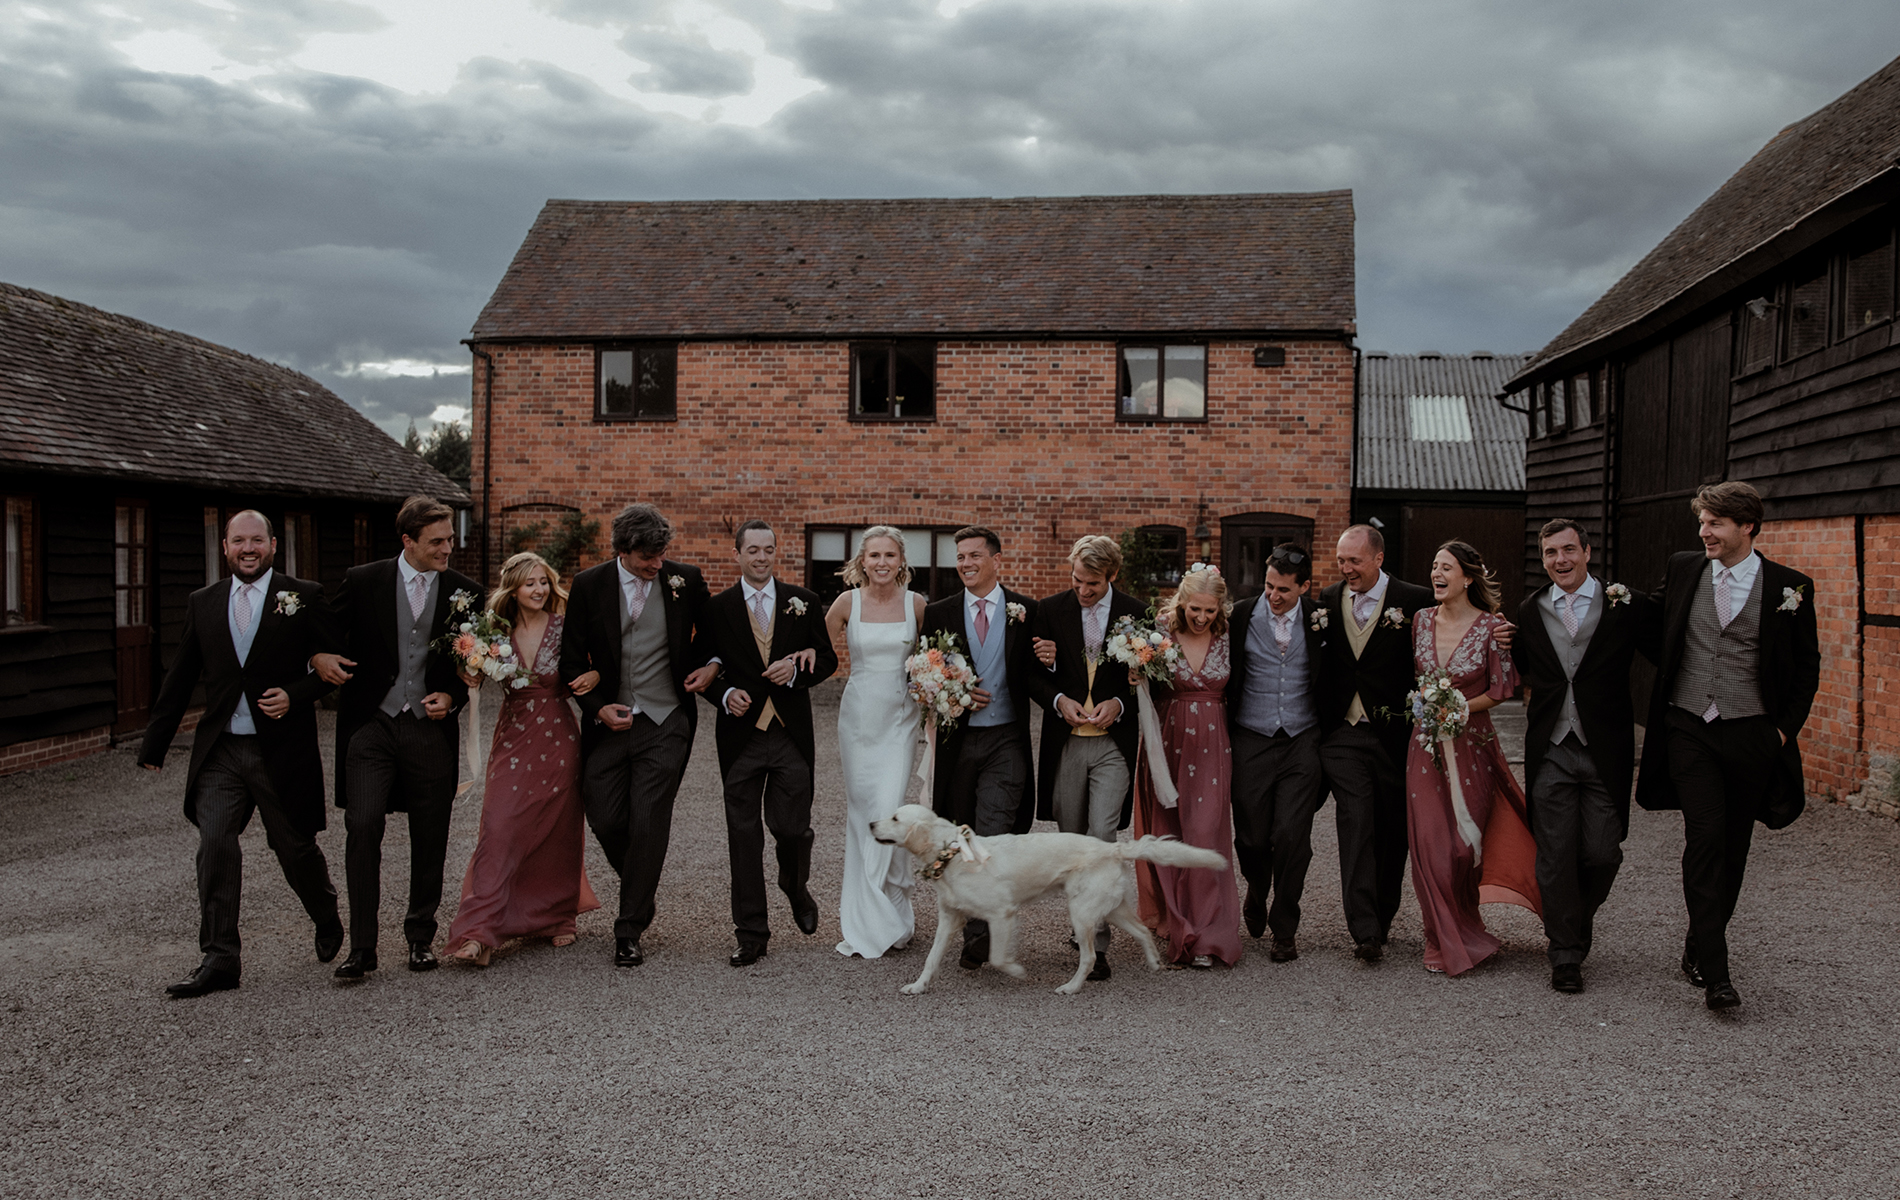 Group shot of wedding bridal party walking in a line smiling and laughing. Bride and groom stand in the middle as their dog runs along side them